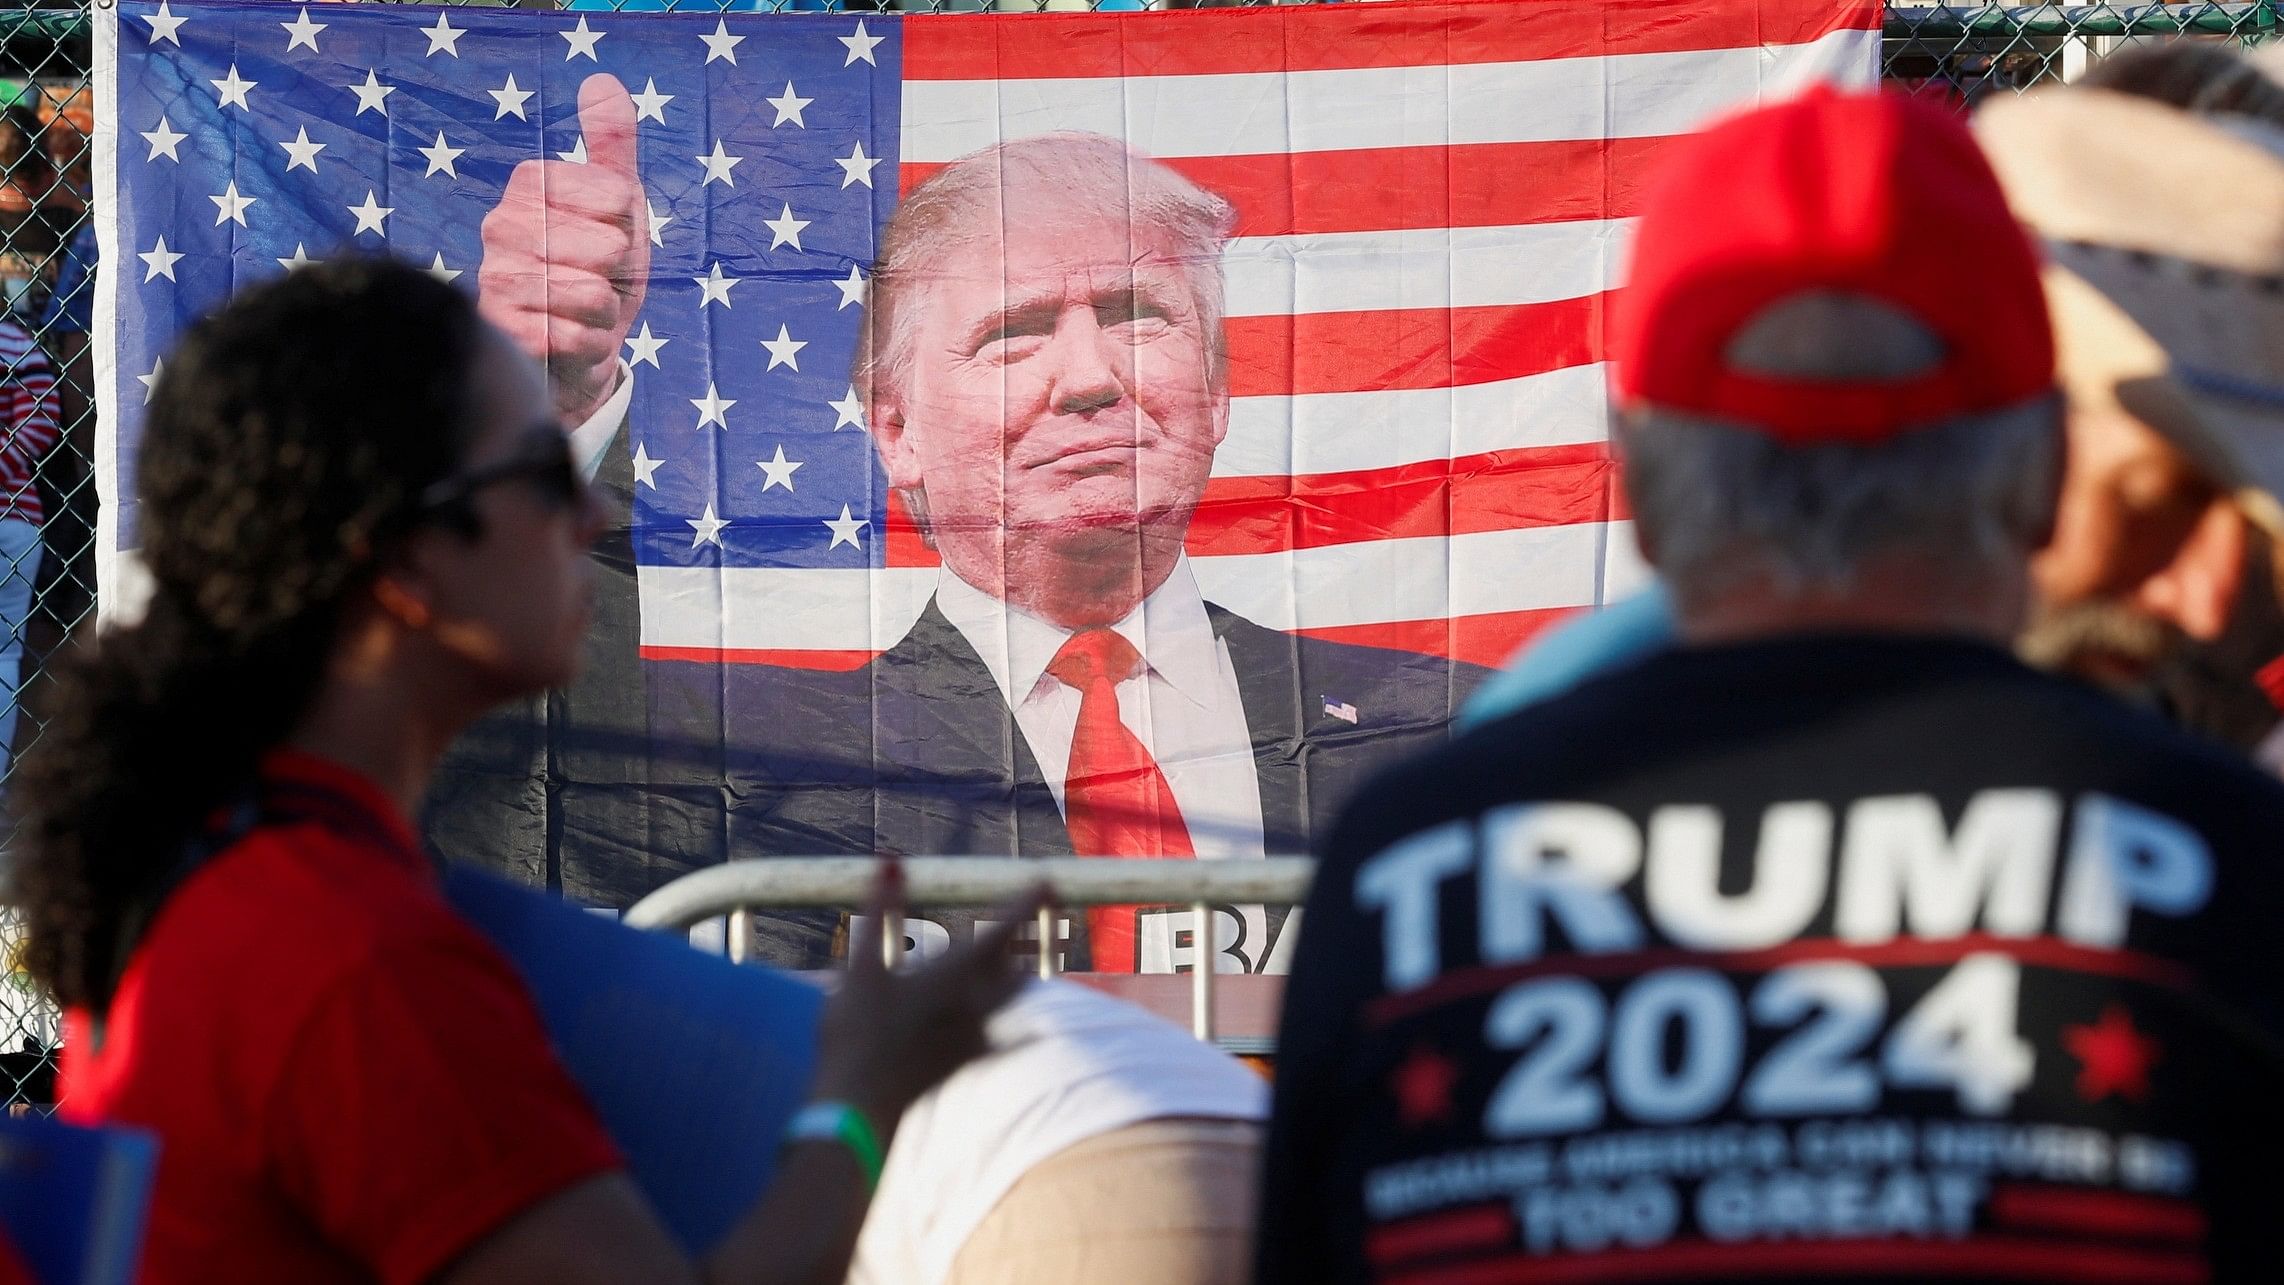 <div class="paragraphs"><p>A view of a U.S. flag with an image of Republican presidential candidate and former U.S. President Donald Trump on it at the Ted Hendricks Stadium ahead of Trump's campaign event in Hialeah, Florida, US </p></div>